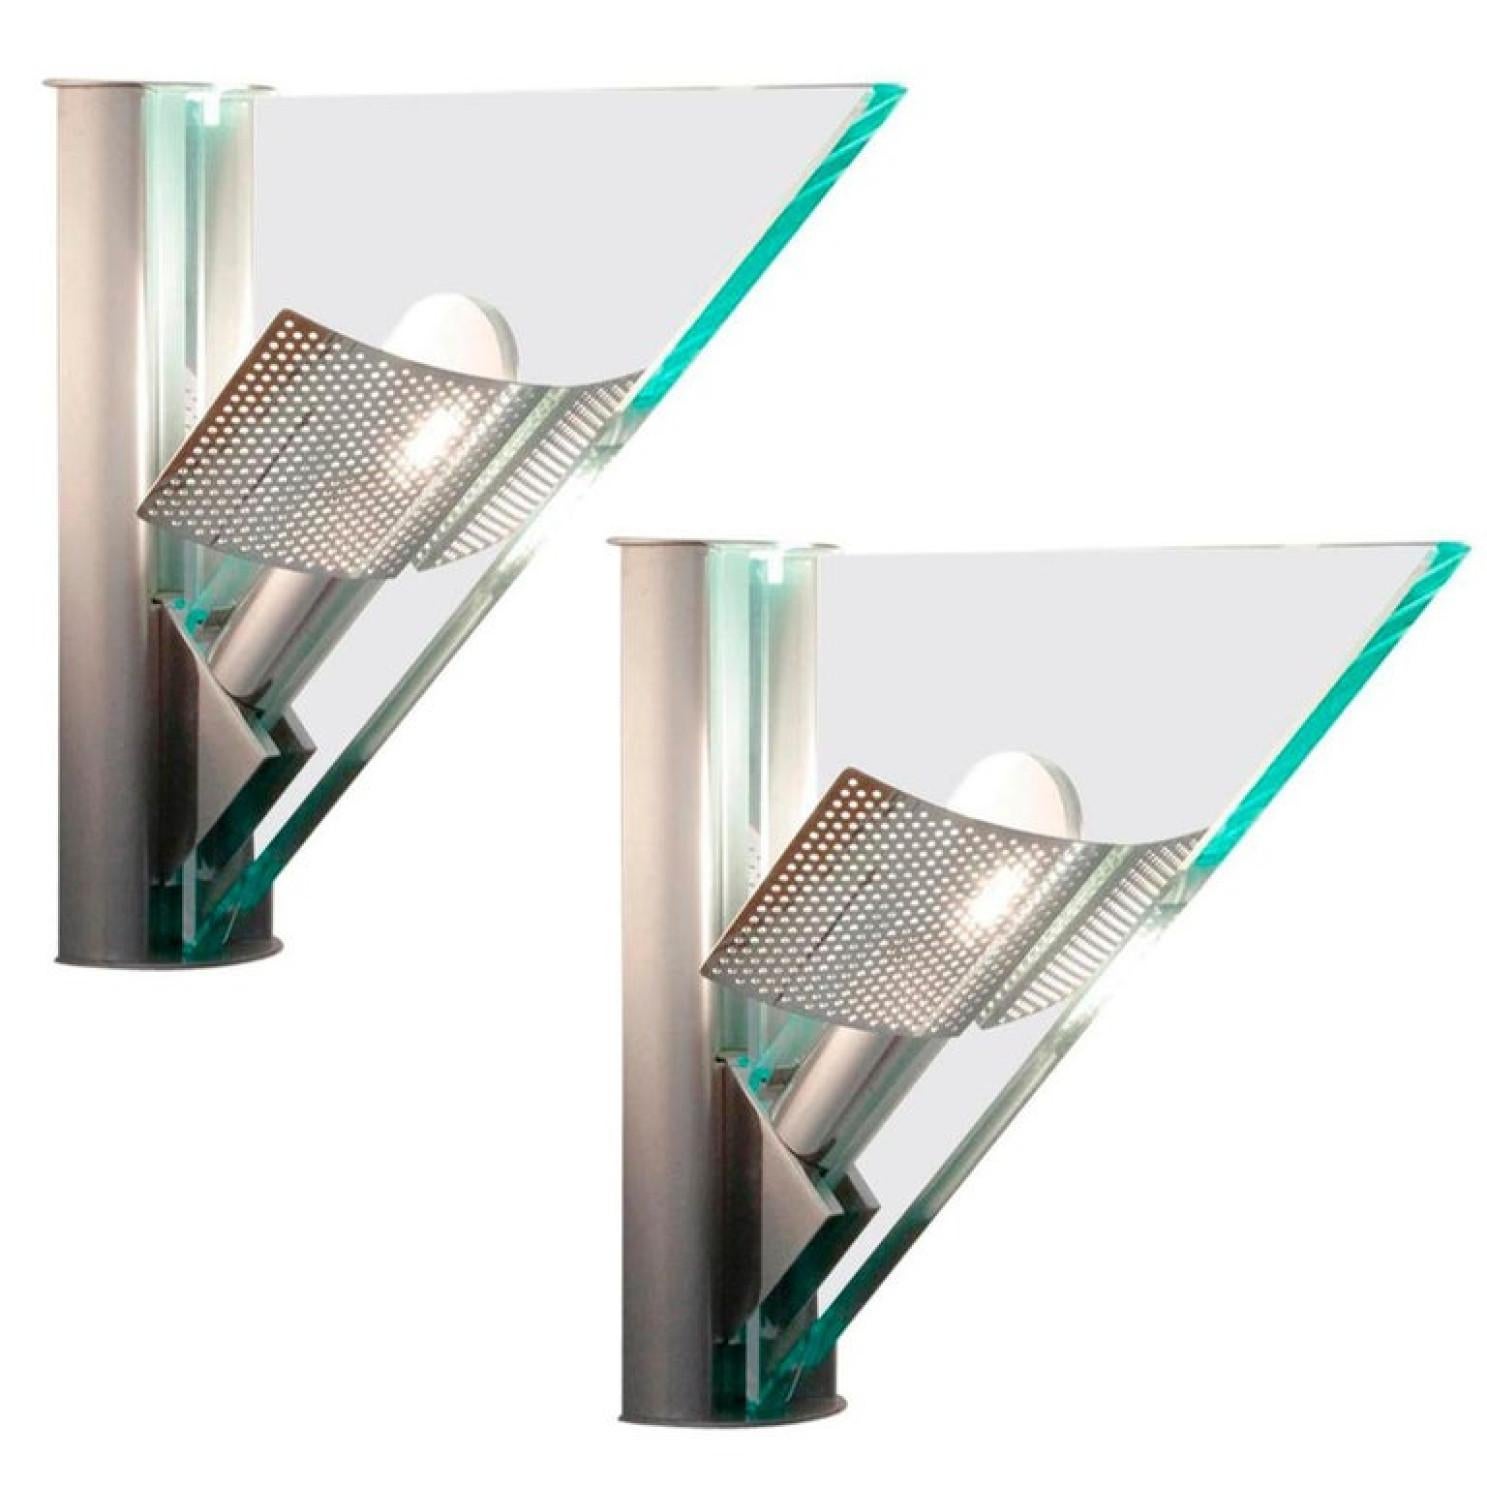 Aluminum One of the Ten Glass Aluminium Triangle Shaped Wall Lights, Artemide, 1984 For Sale